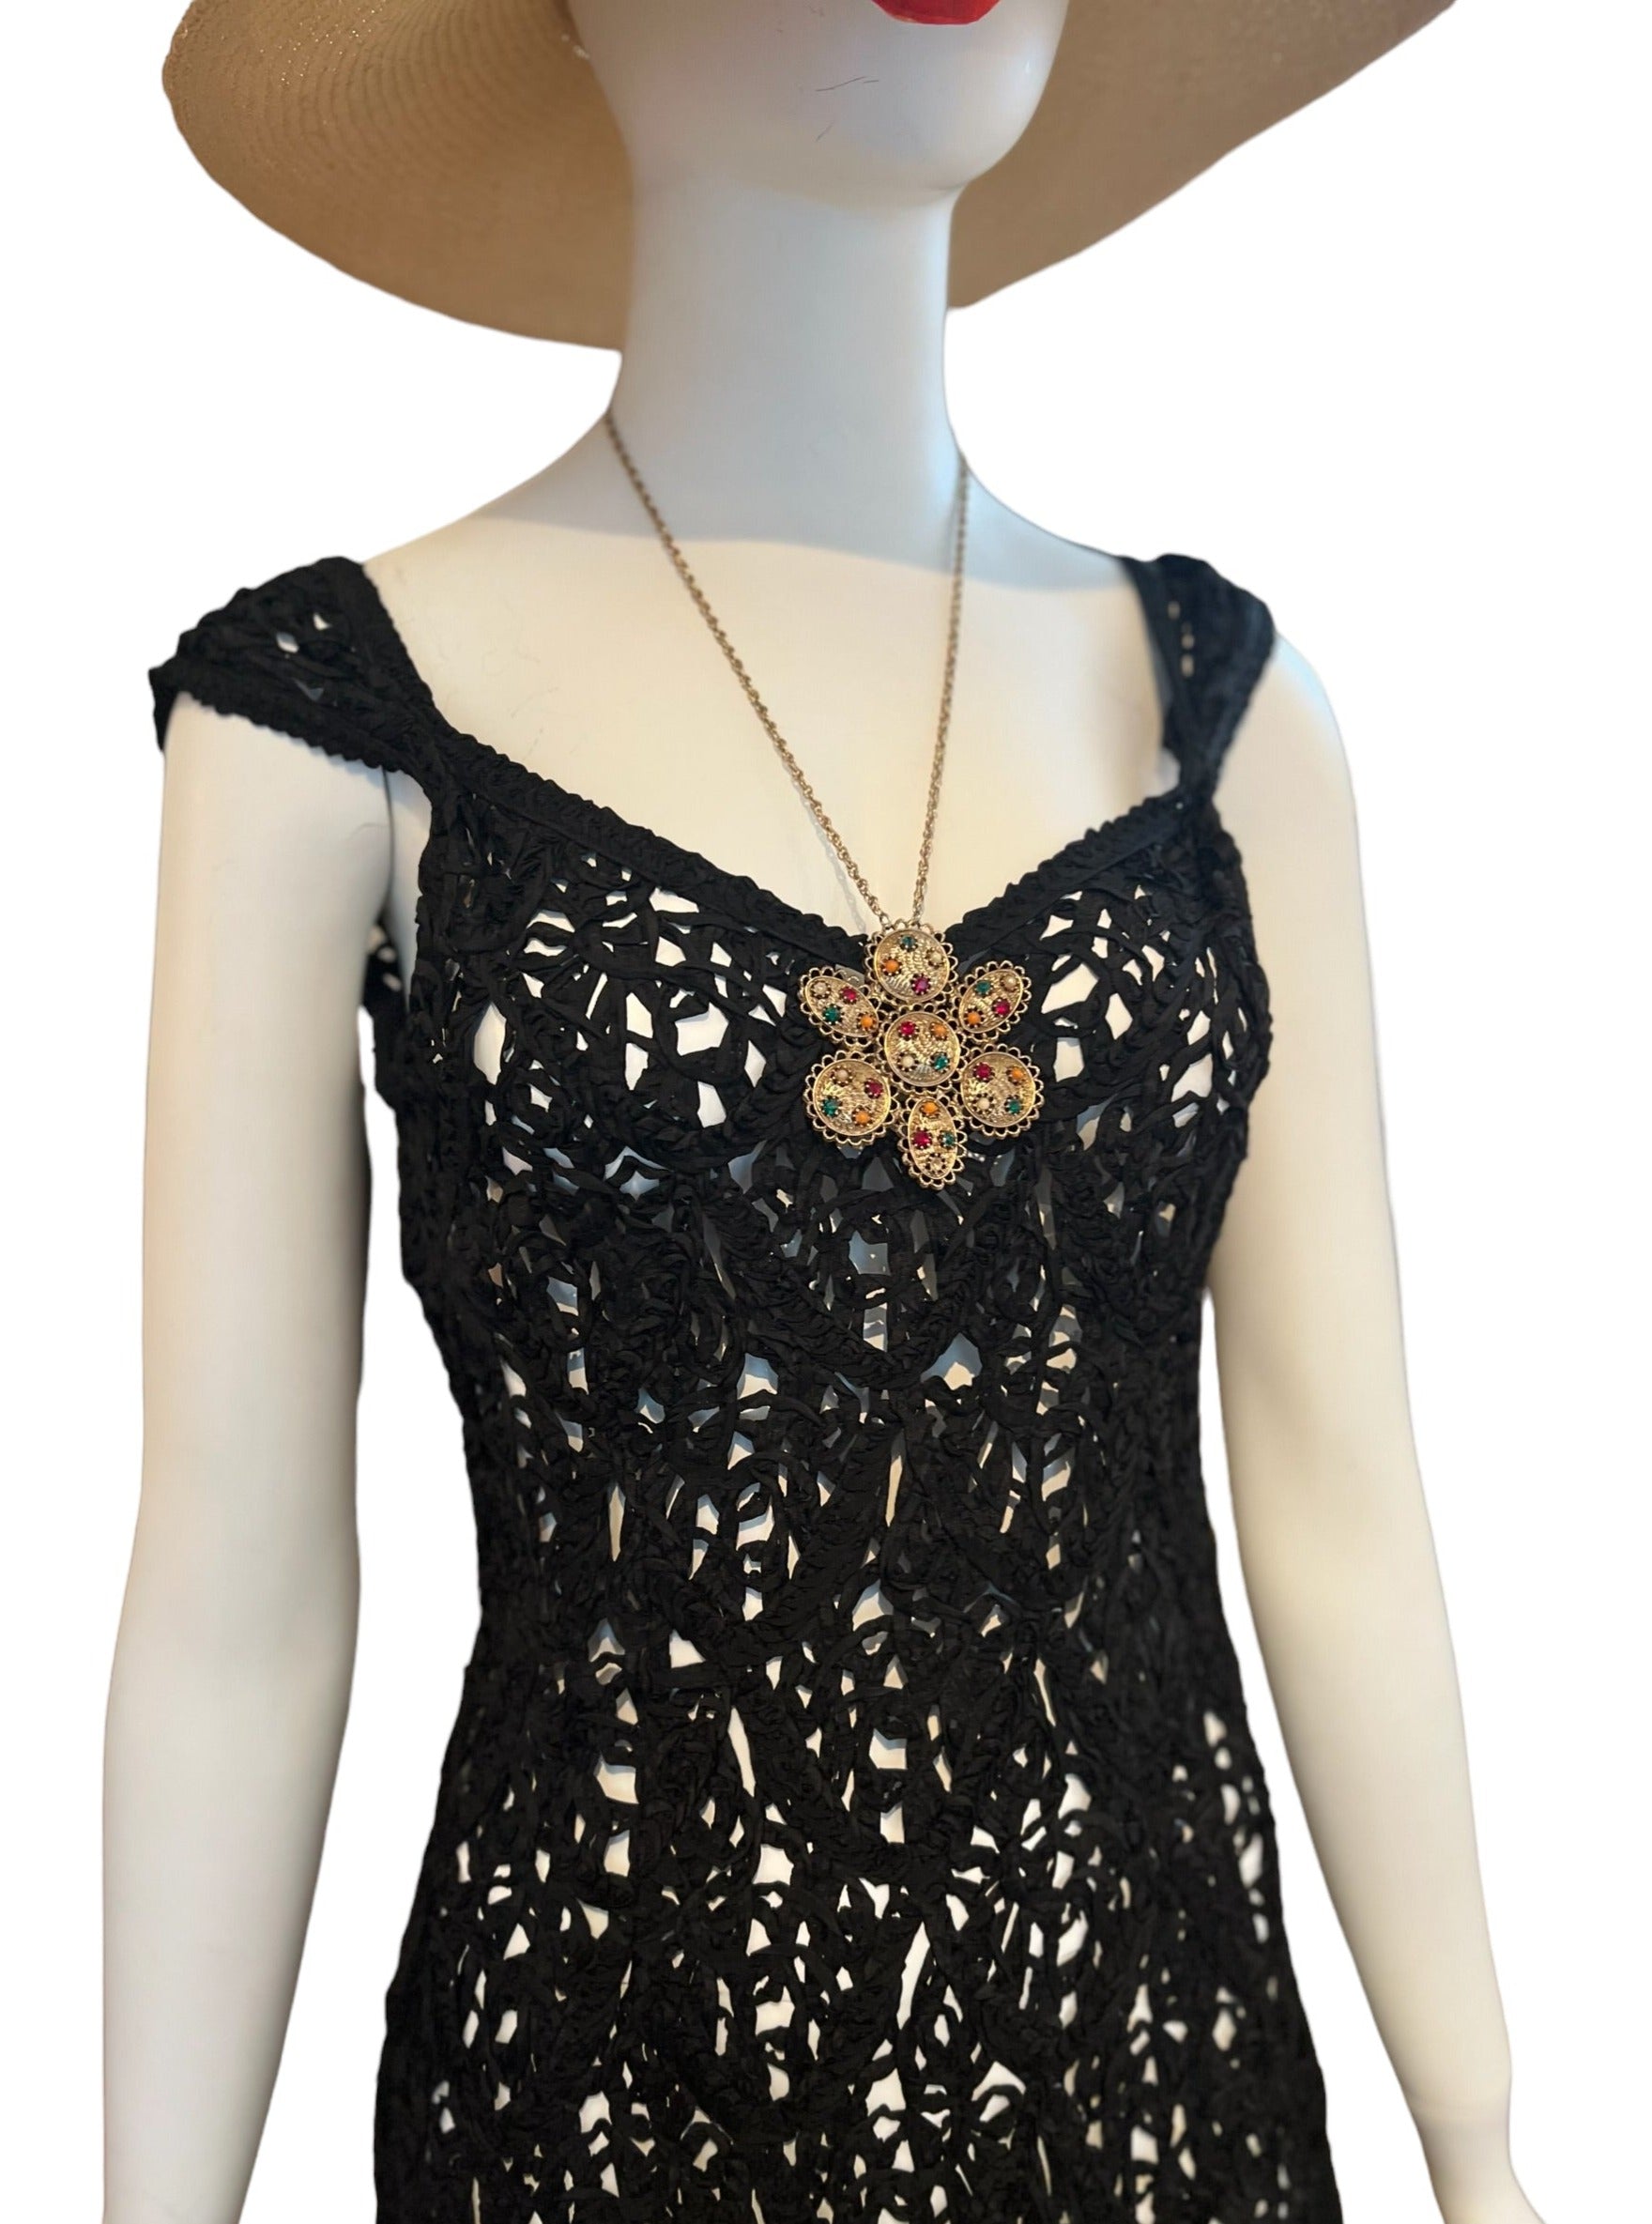 hand-crocheted one-of-a-kind lbd dress that is woven and sophisticated